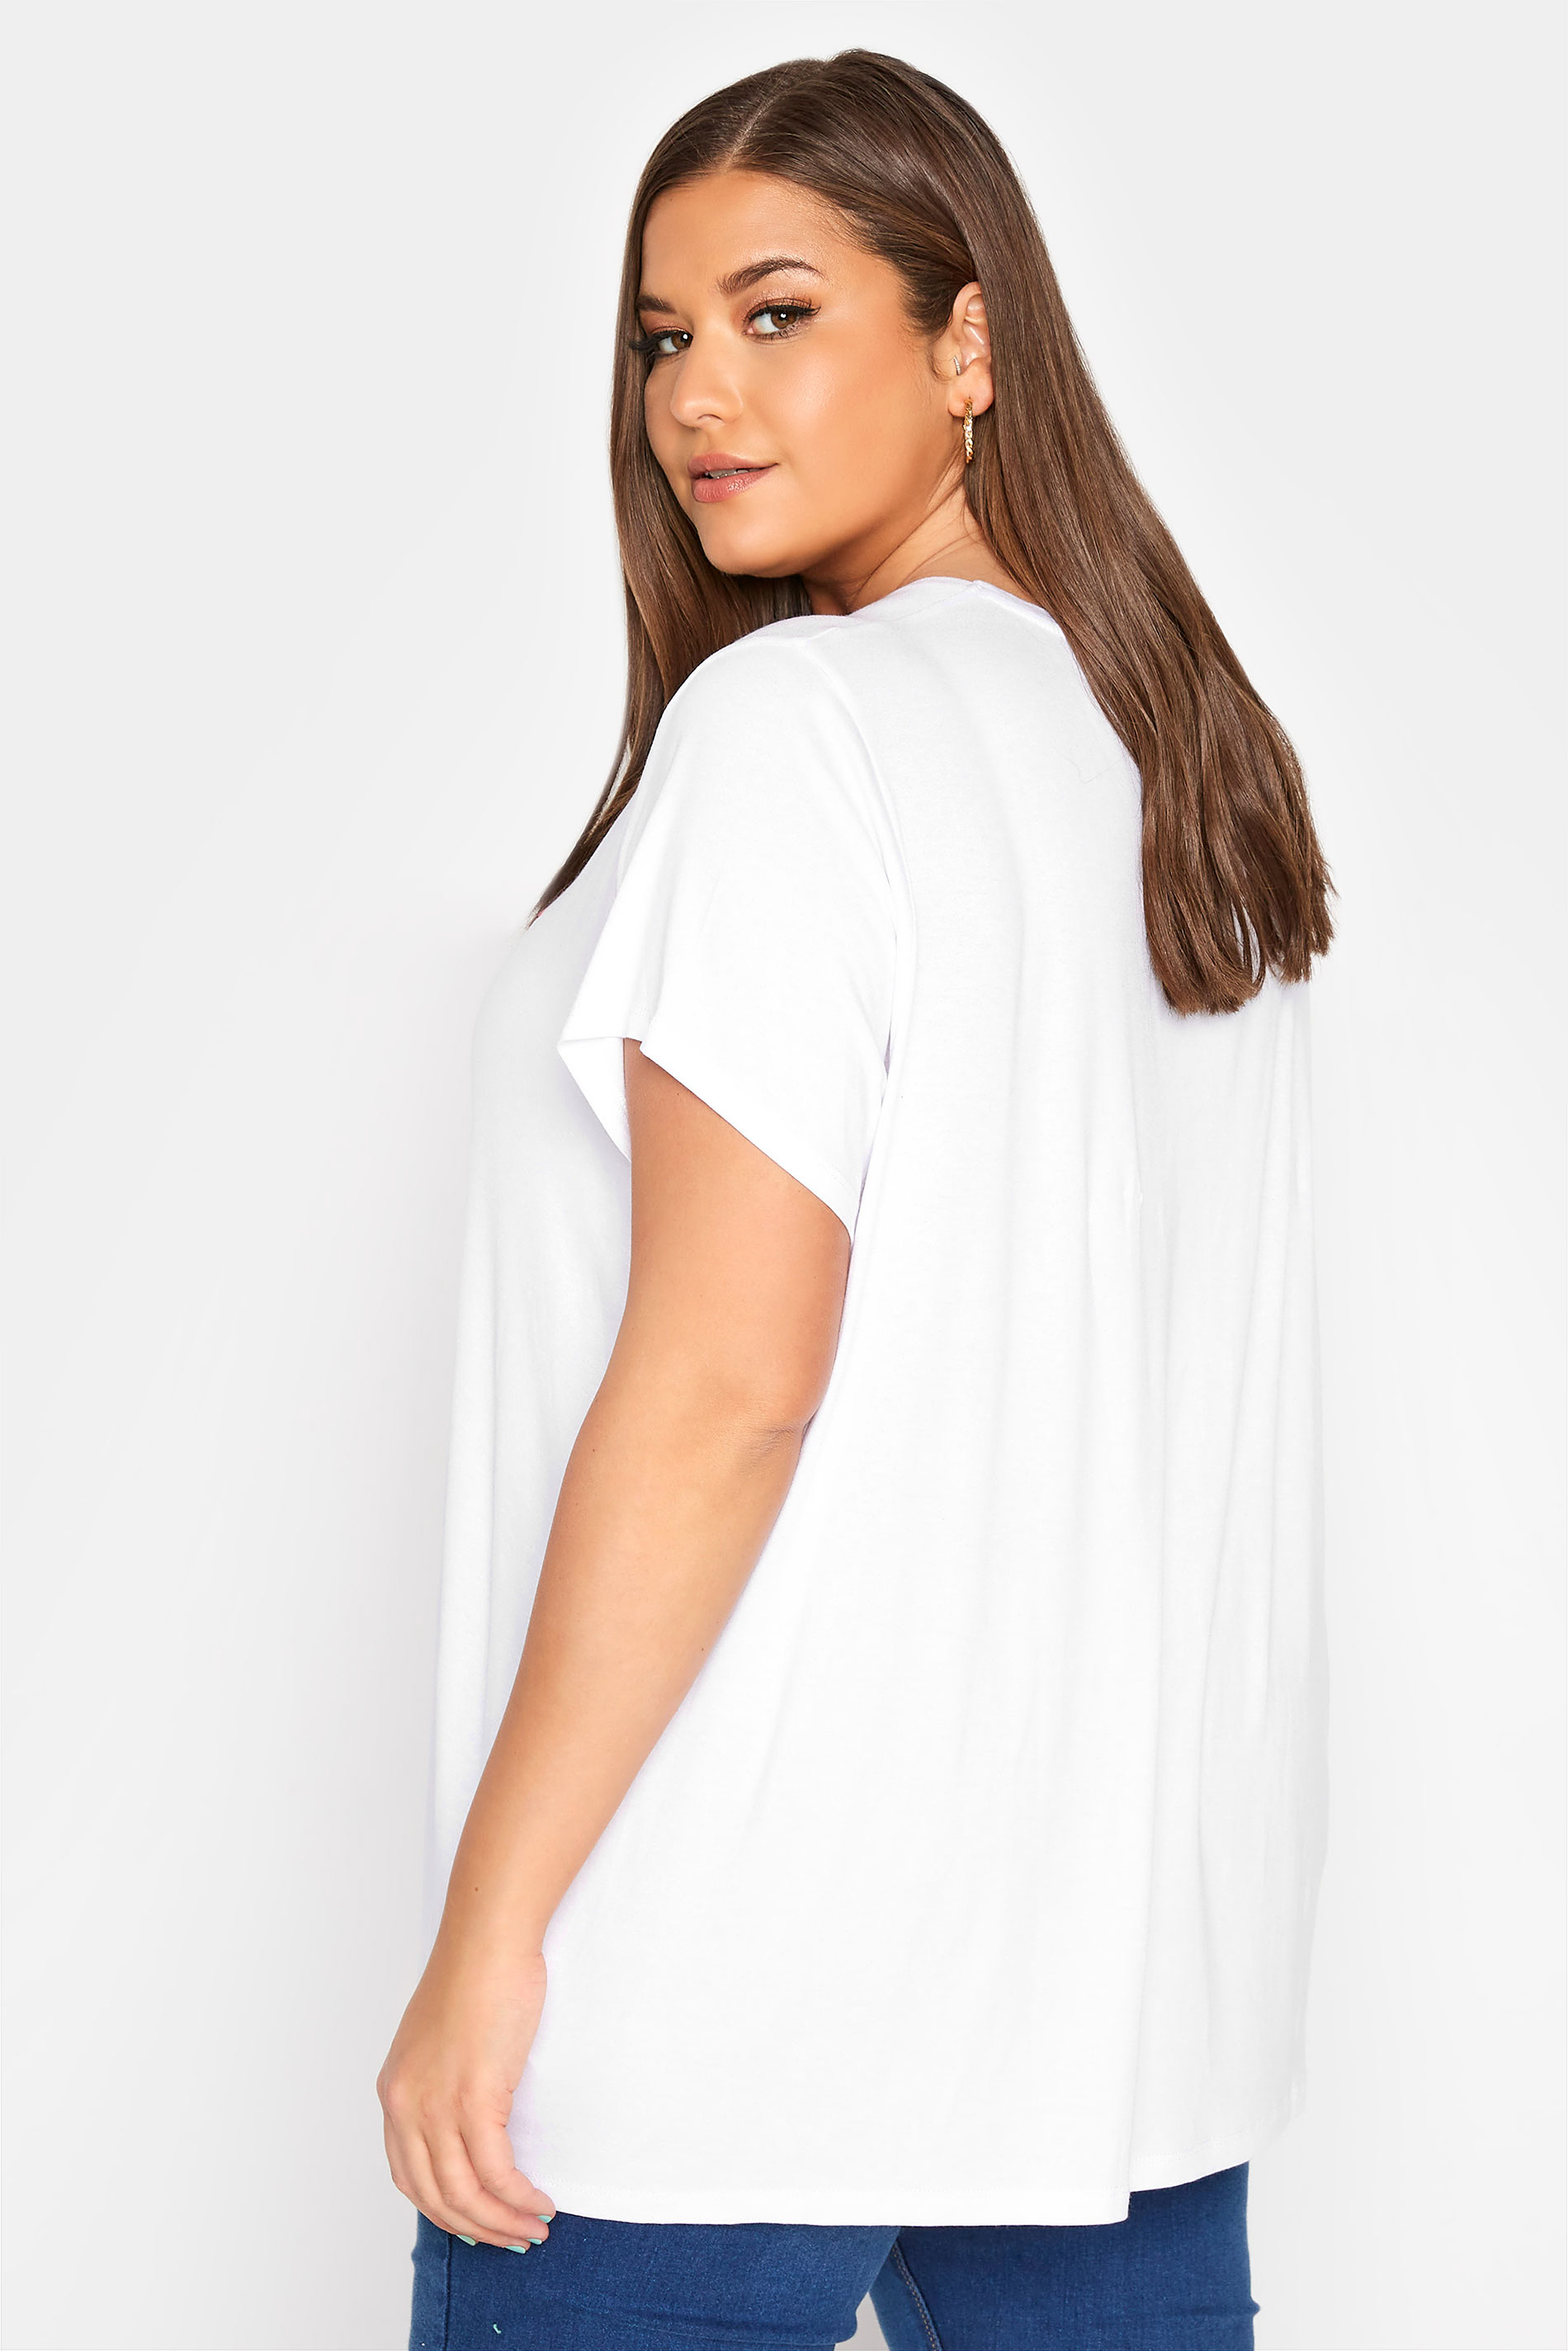 Grande taille  Tops Grande taille  T-Shirts | T-Shirt Blanc 'You Got This' en Jersey - SG25185